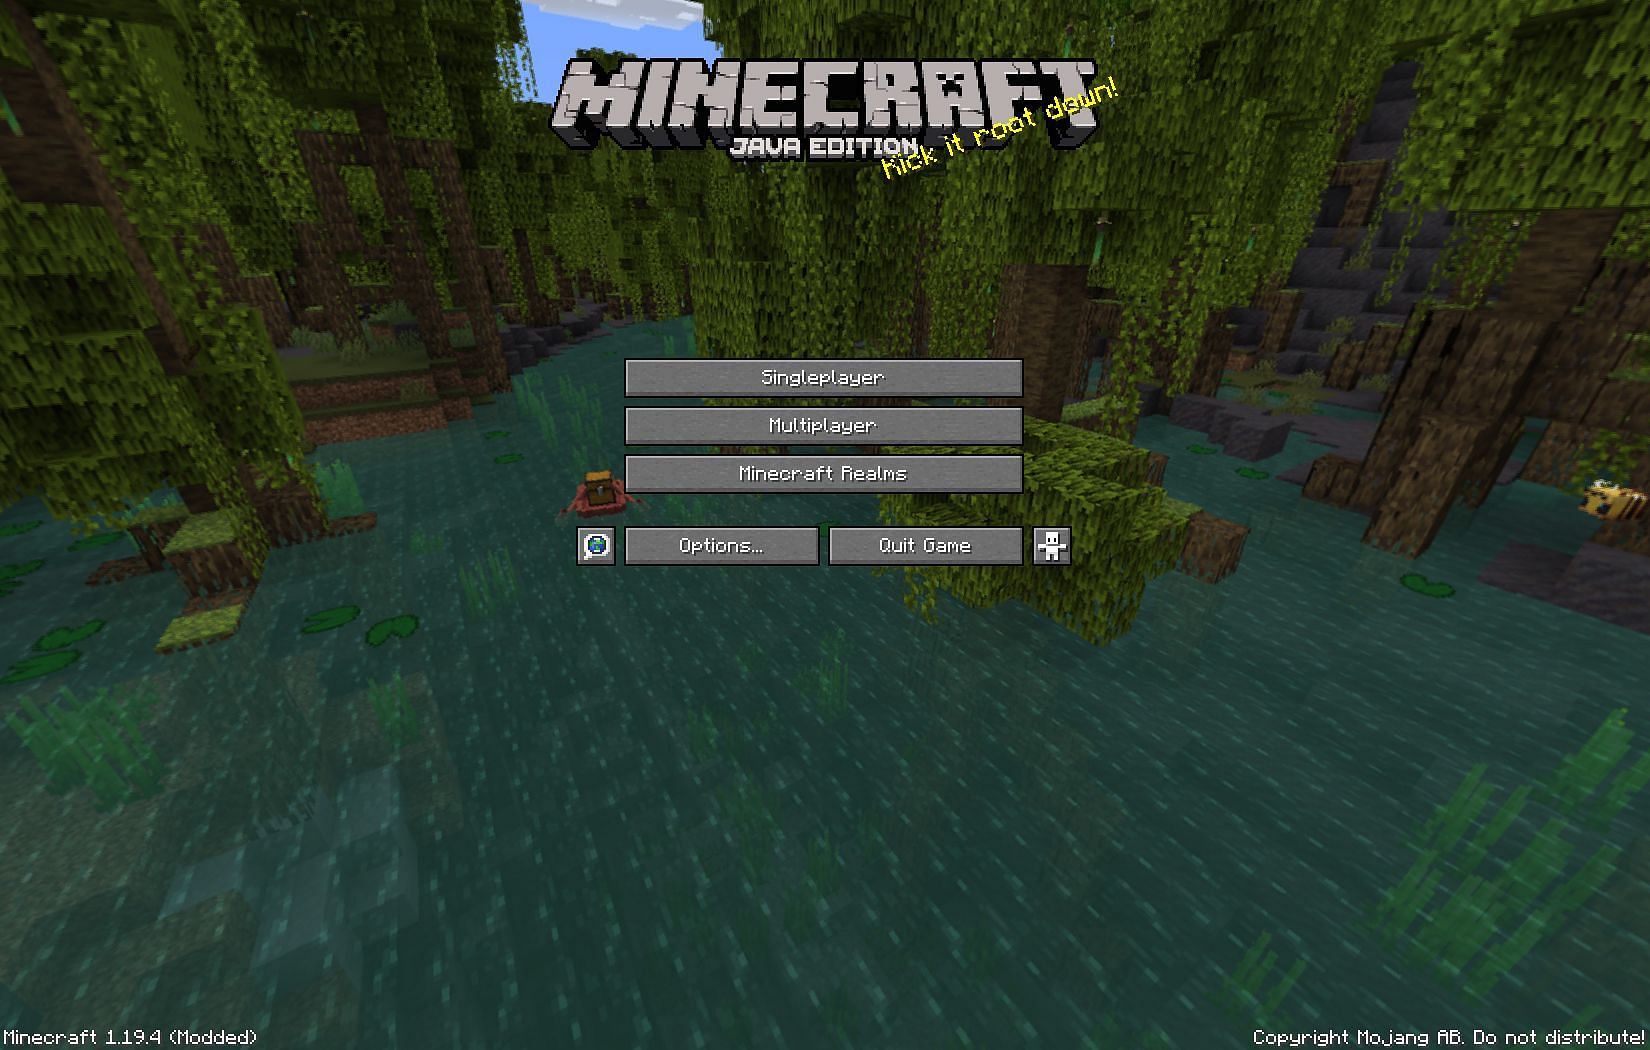 Can you play the same Minecraft account on different devices?